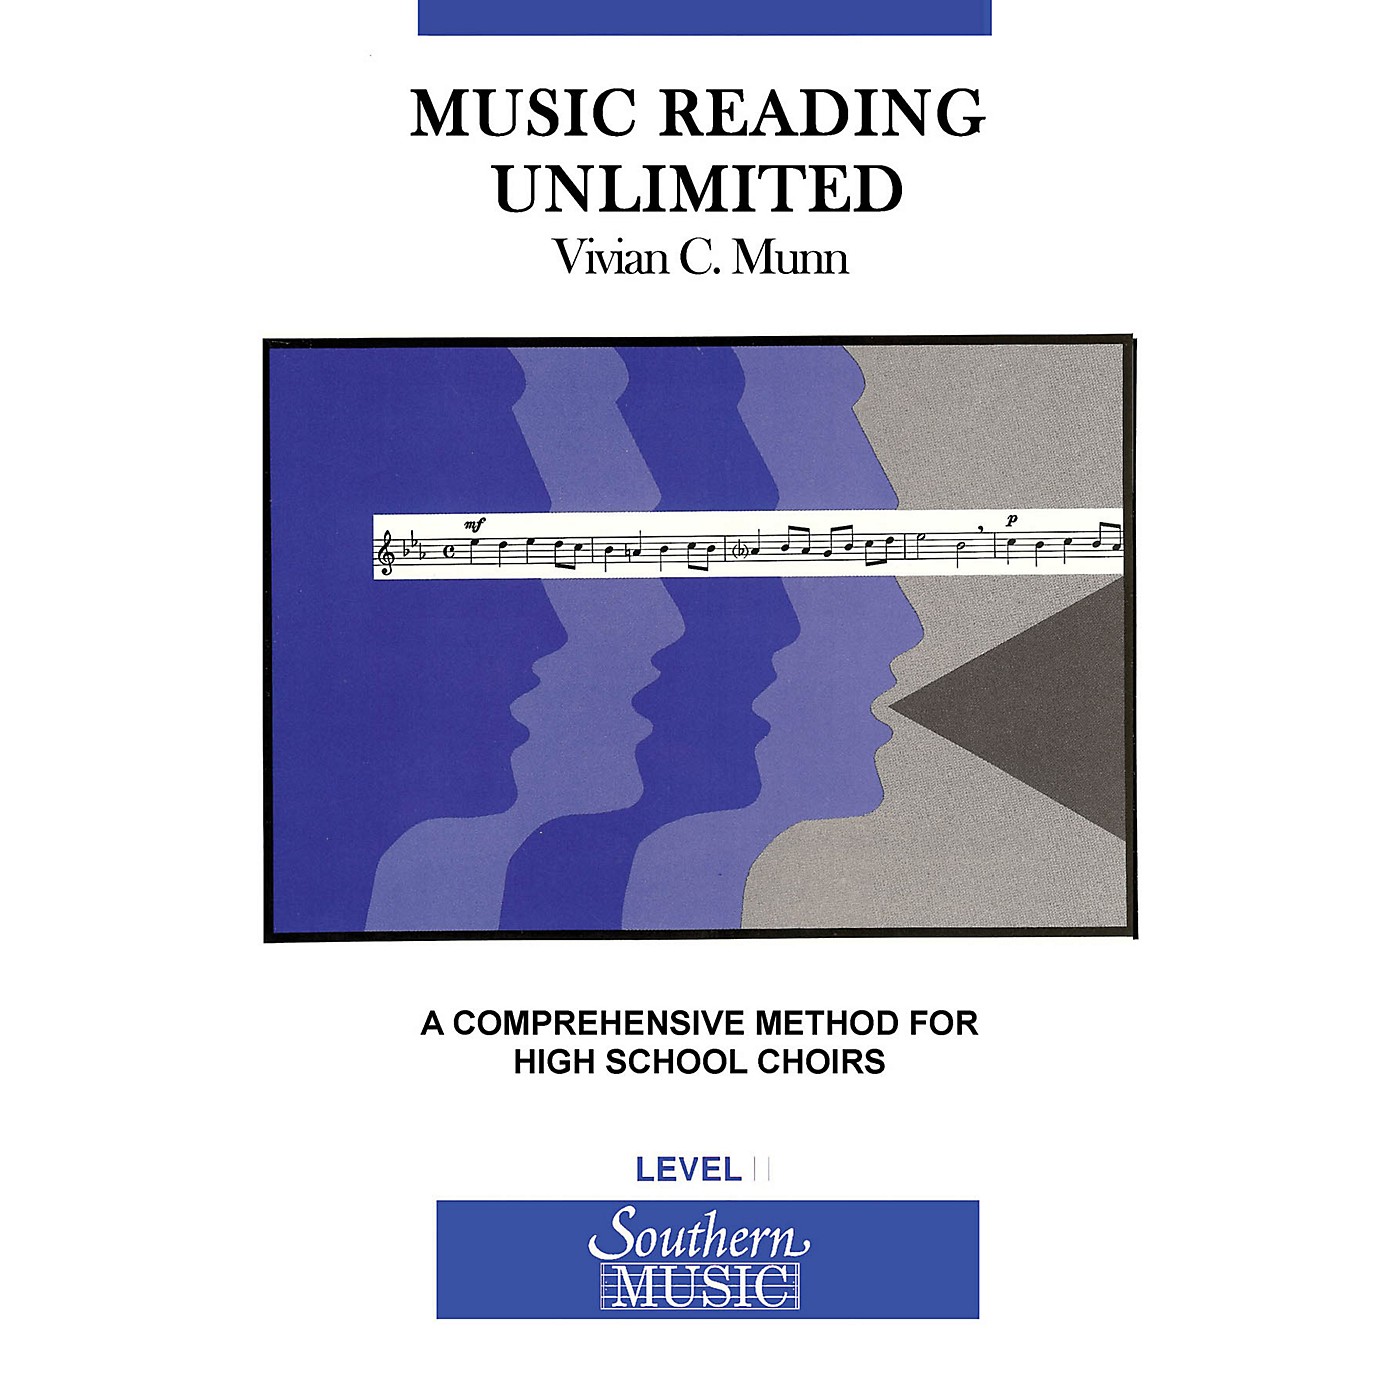 Southern Music Reading Unlimited (A Comprehensive Method for High School Choirs Level 1 Book (Student)) thumbnail